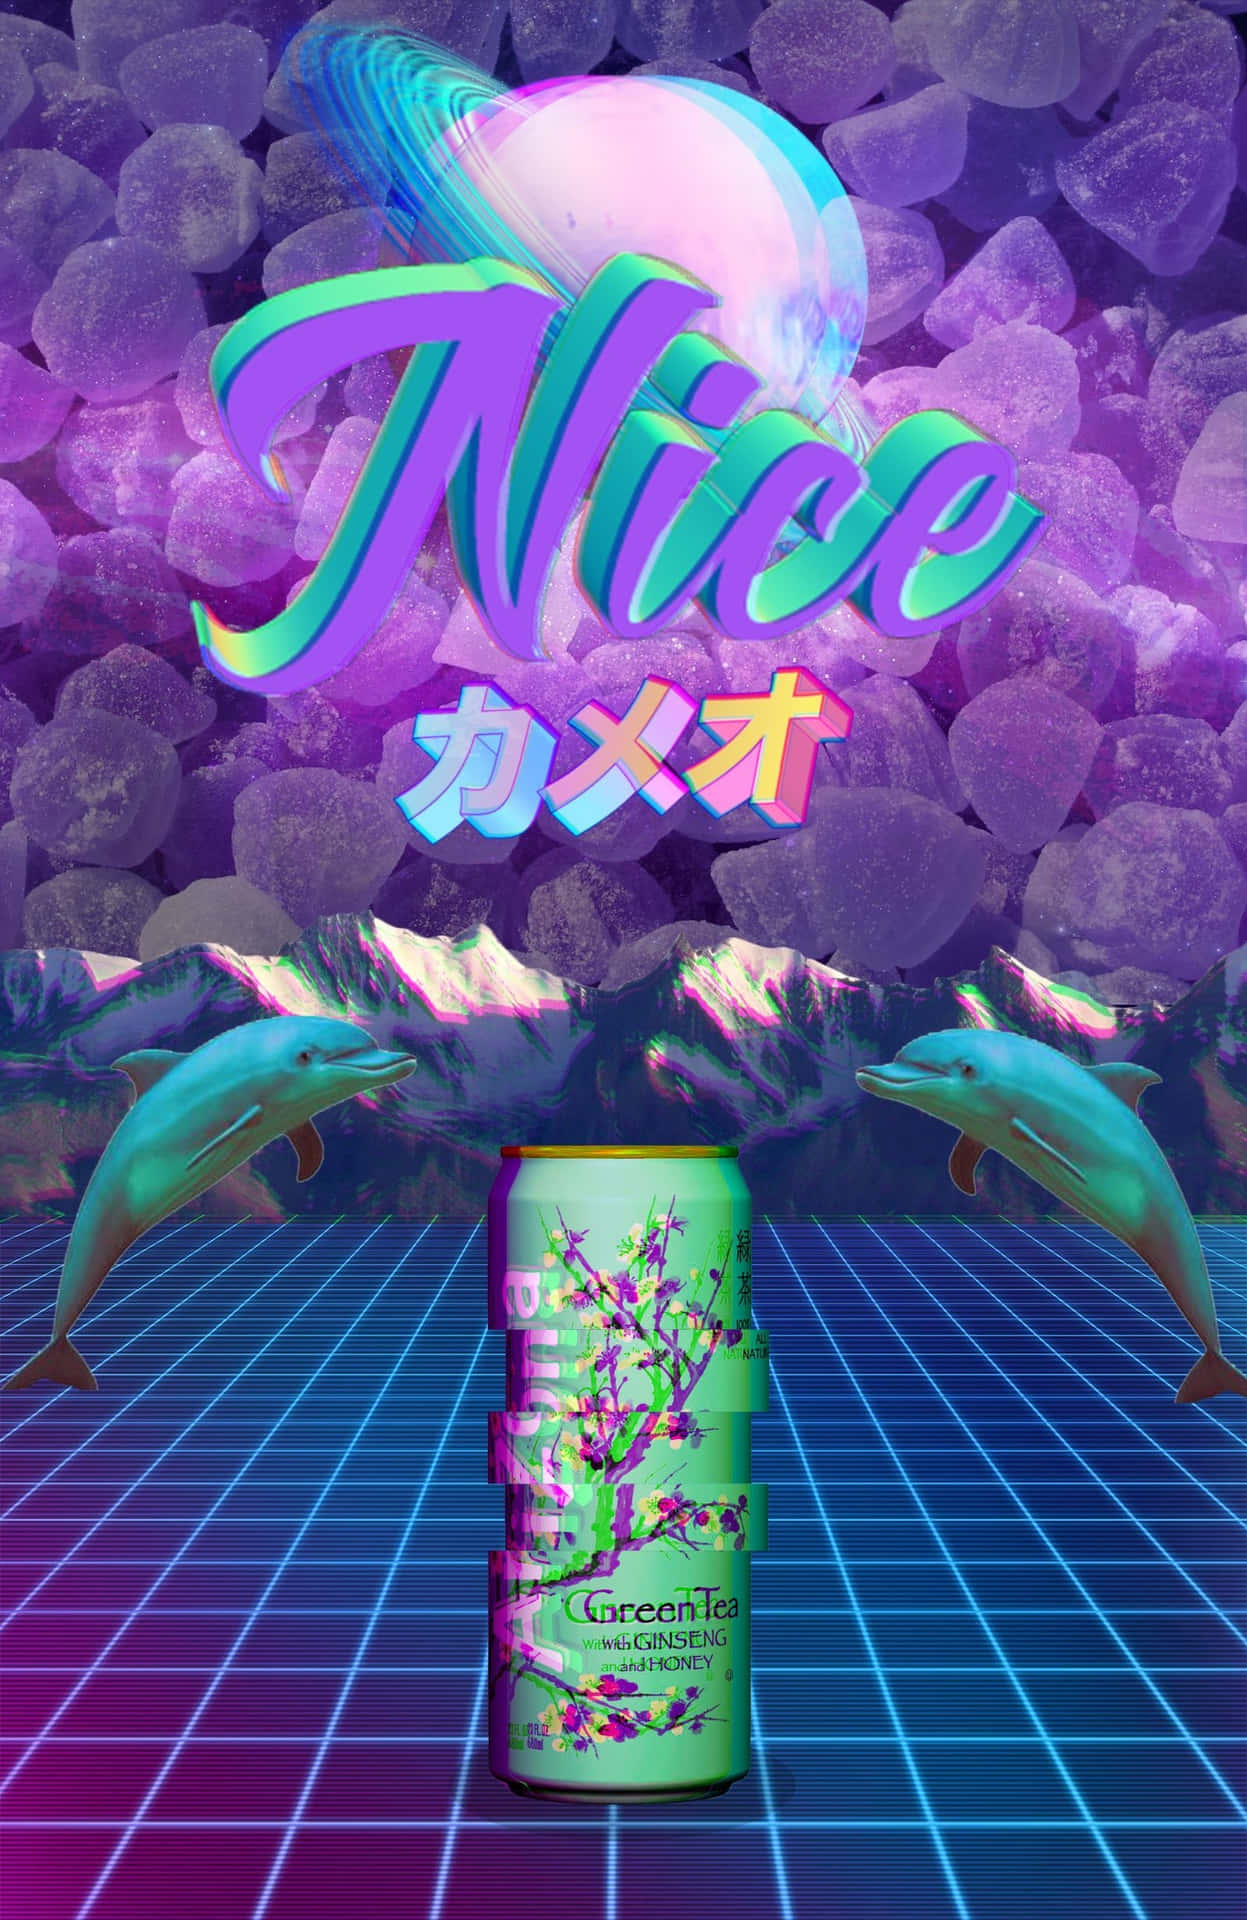 Enjoy a Dreamy Aesthetic with a Vaporwave Iphone Wallpaper